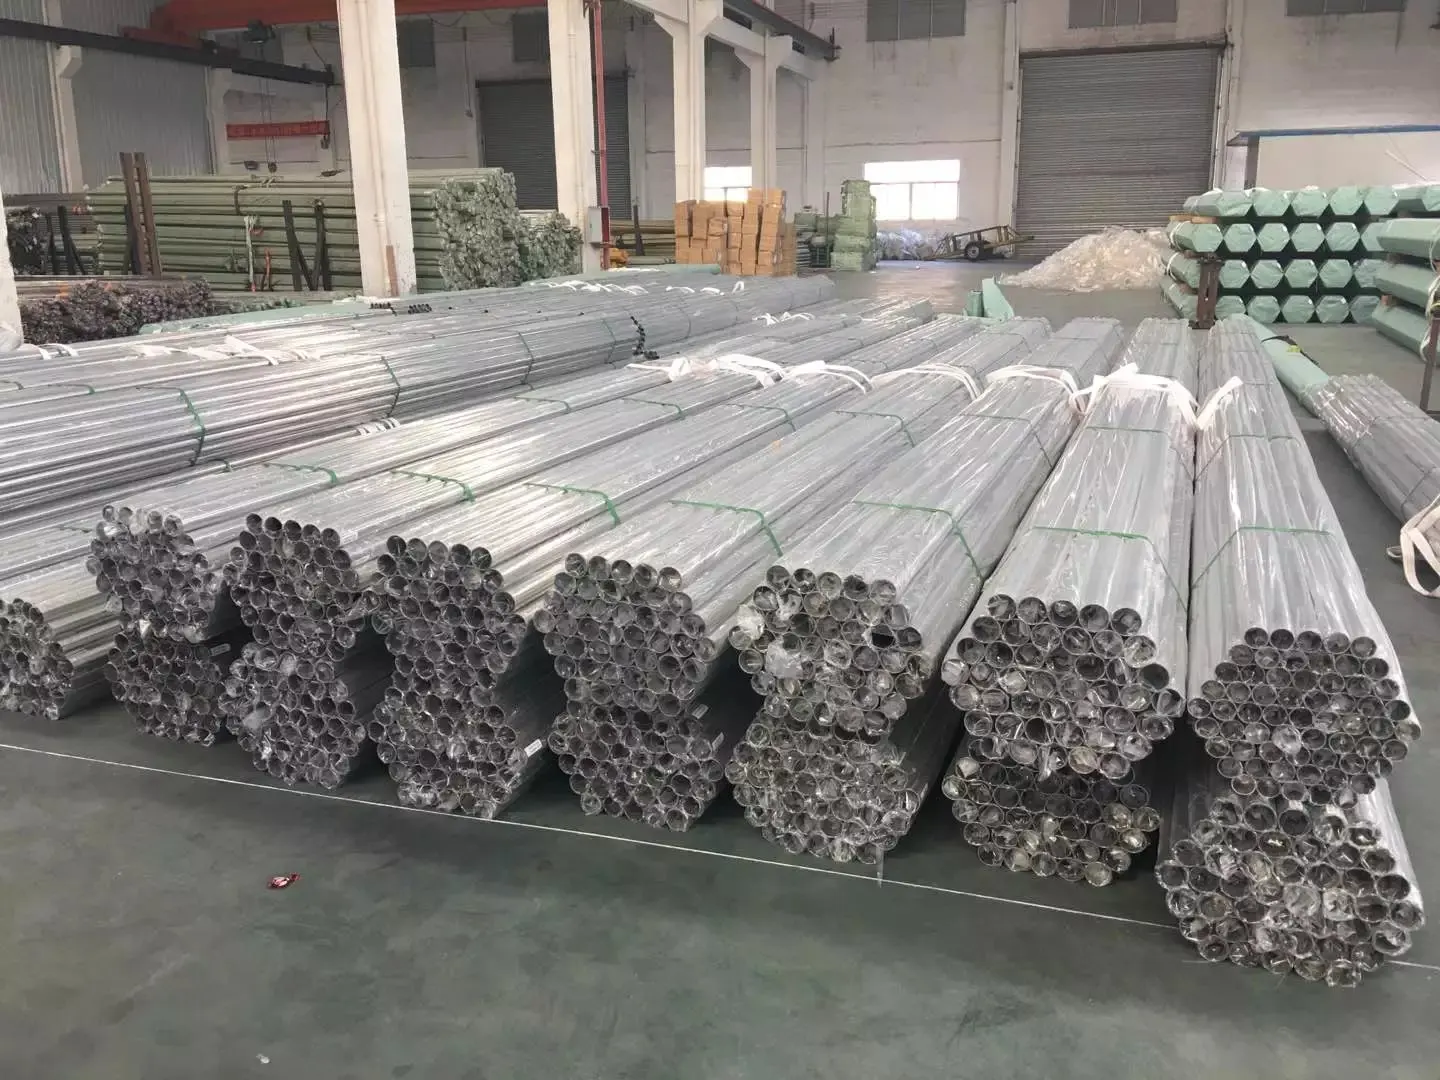 polished decorative 30*30mm 0.88mm thickness welded square stainless steel square pipe